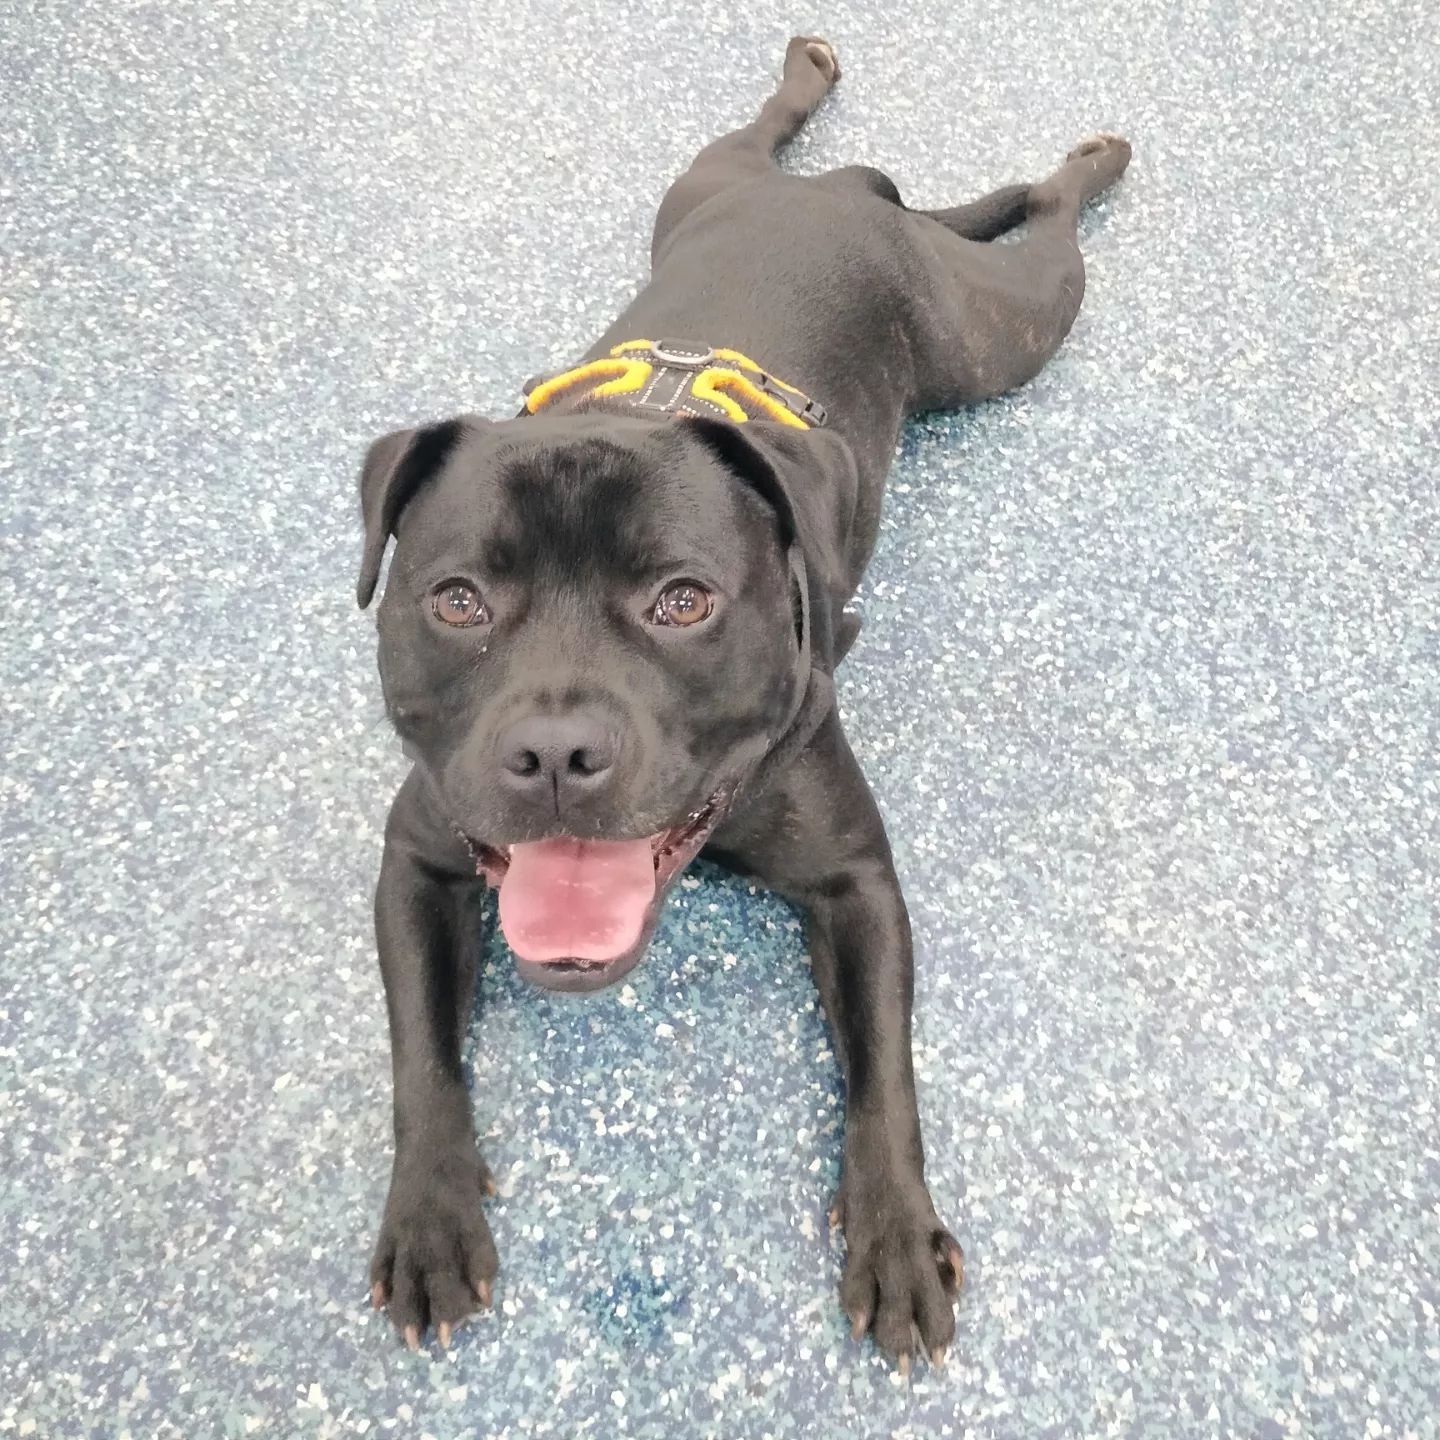 Staffy Andrew and his awesome folks came in for a 1:1 session where we focused on engagement skills and loose lead walking. 

As you can see he and his Ma absolutely nailed it and I am really looking forward to seeing how they progress through our tr